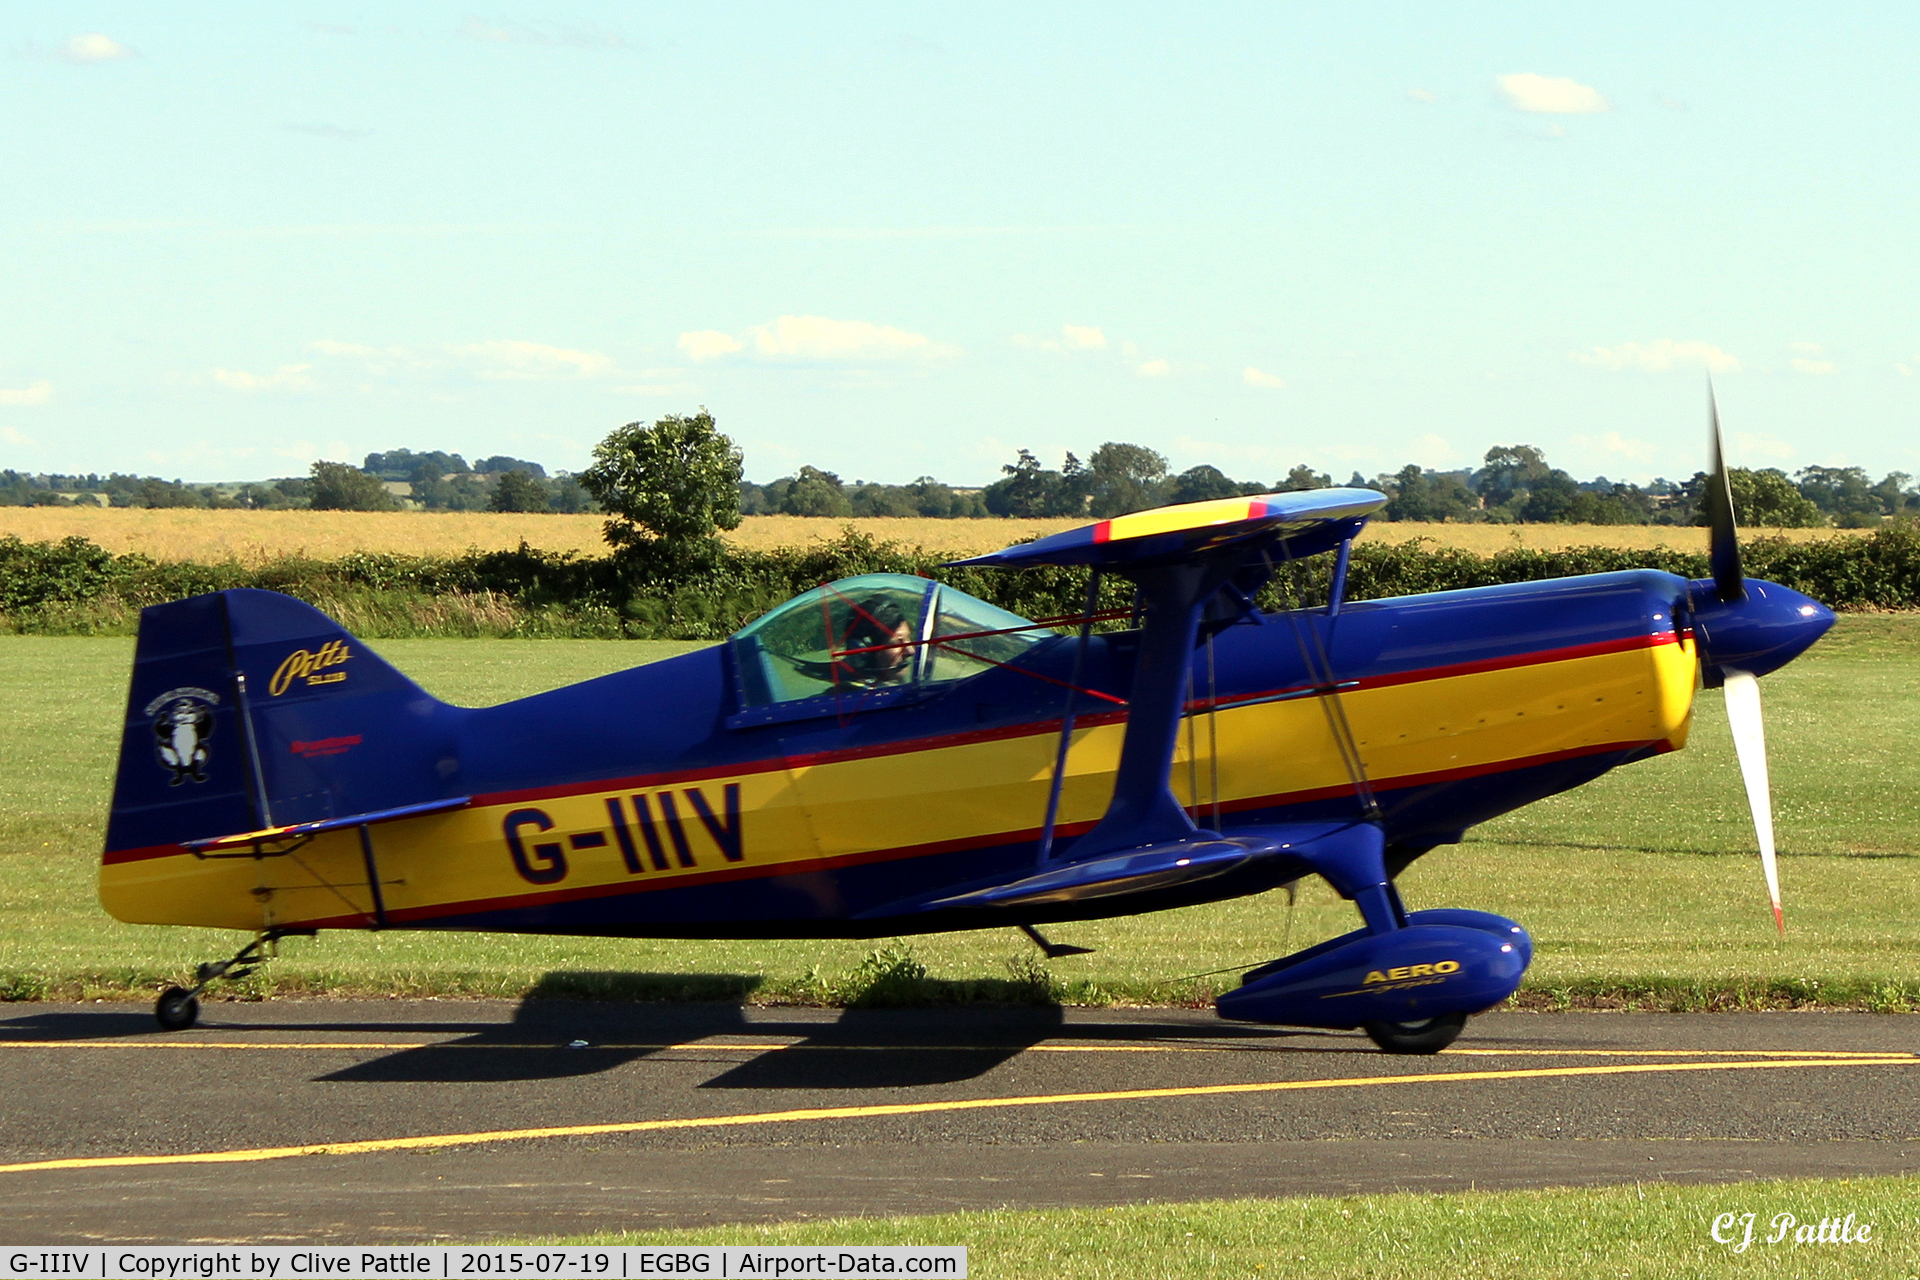 G-IIIV, 2002 Pitts S-1-11B/260 Super Stinker C/N PFA 273-13005, In action at Leicester EGBG